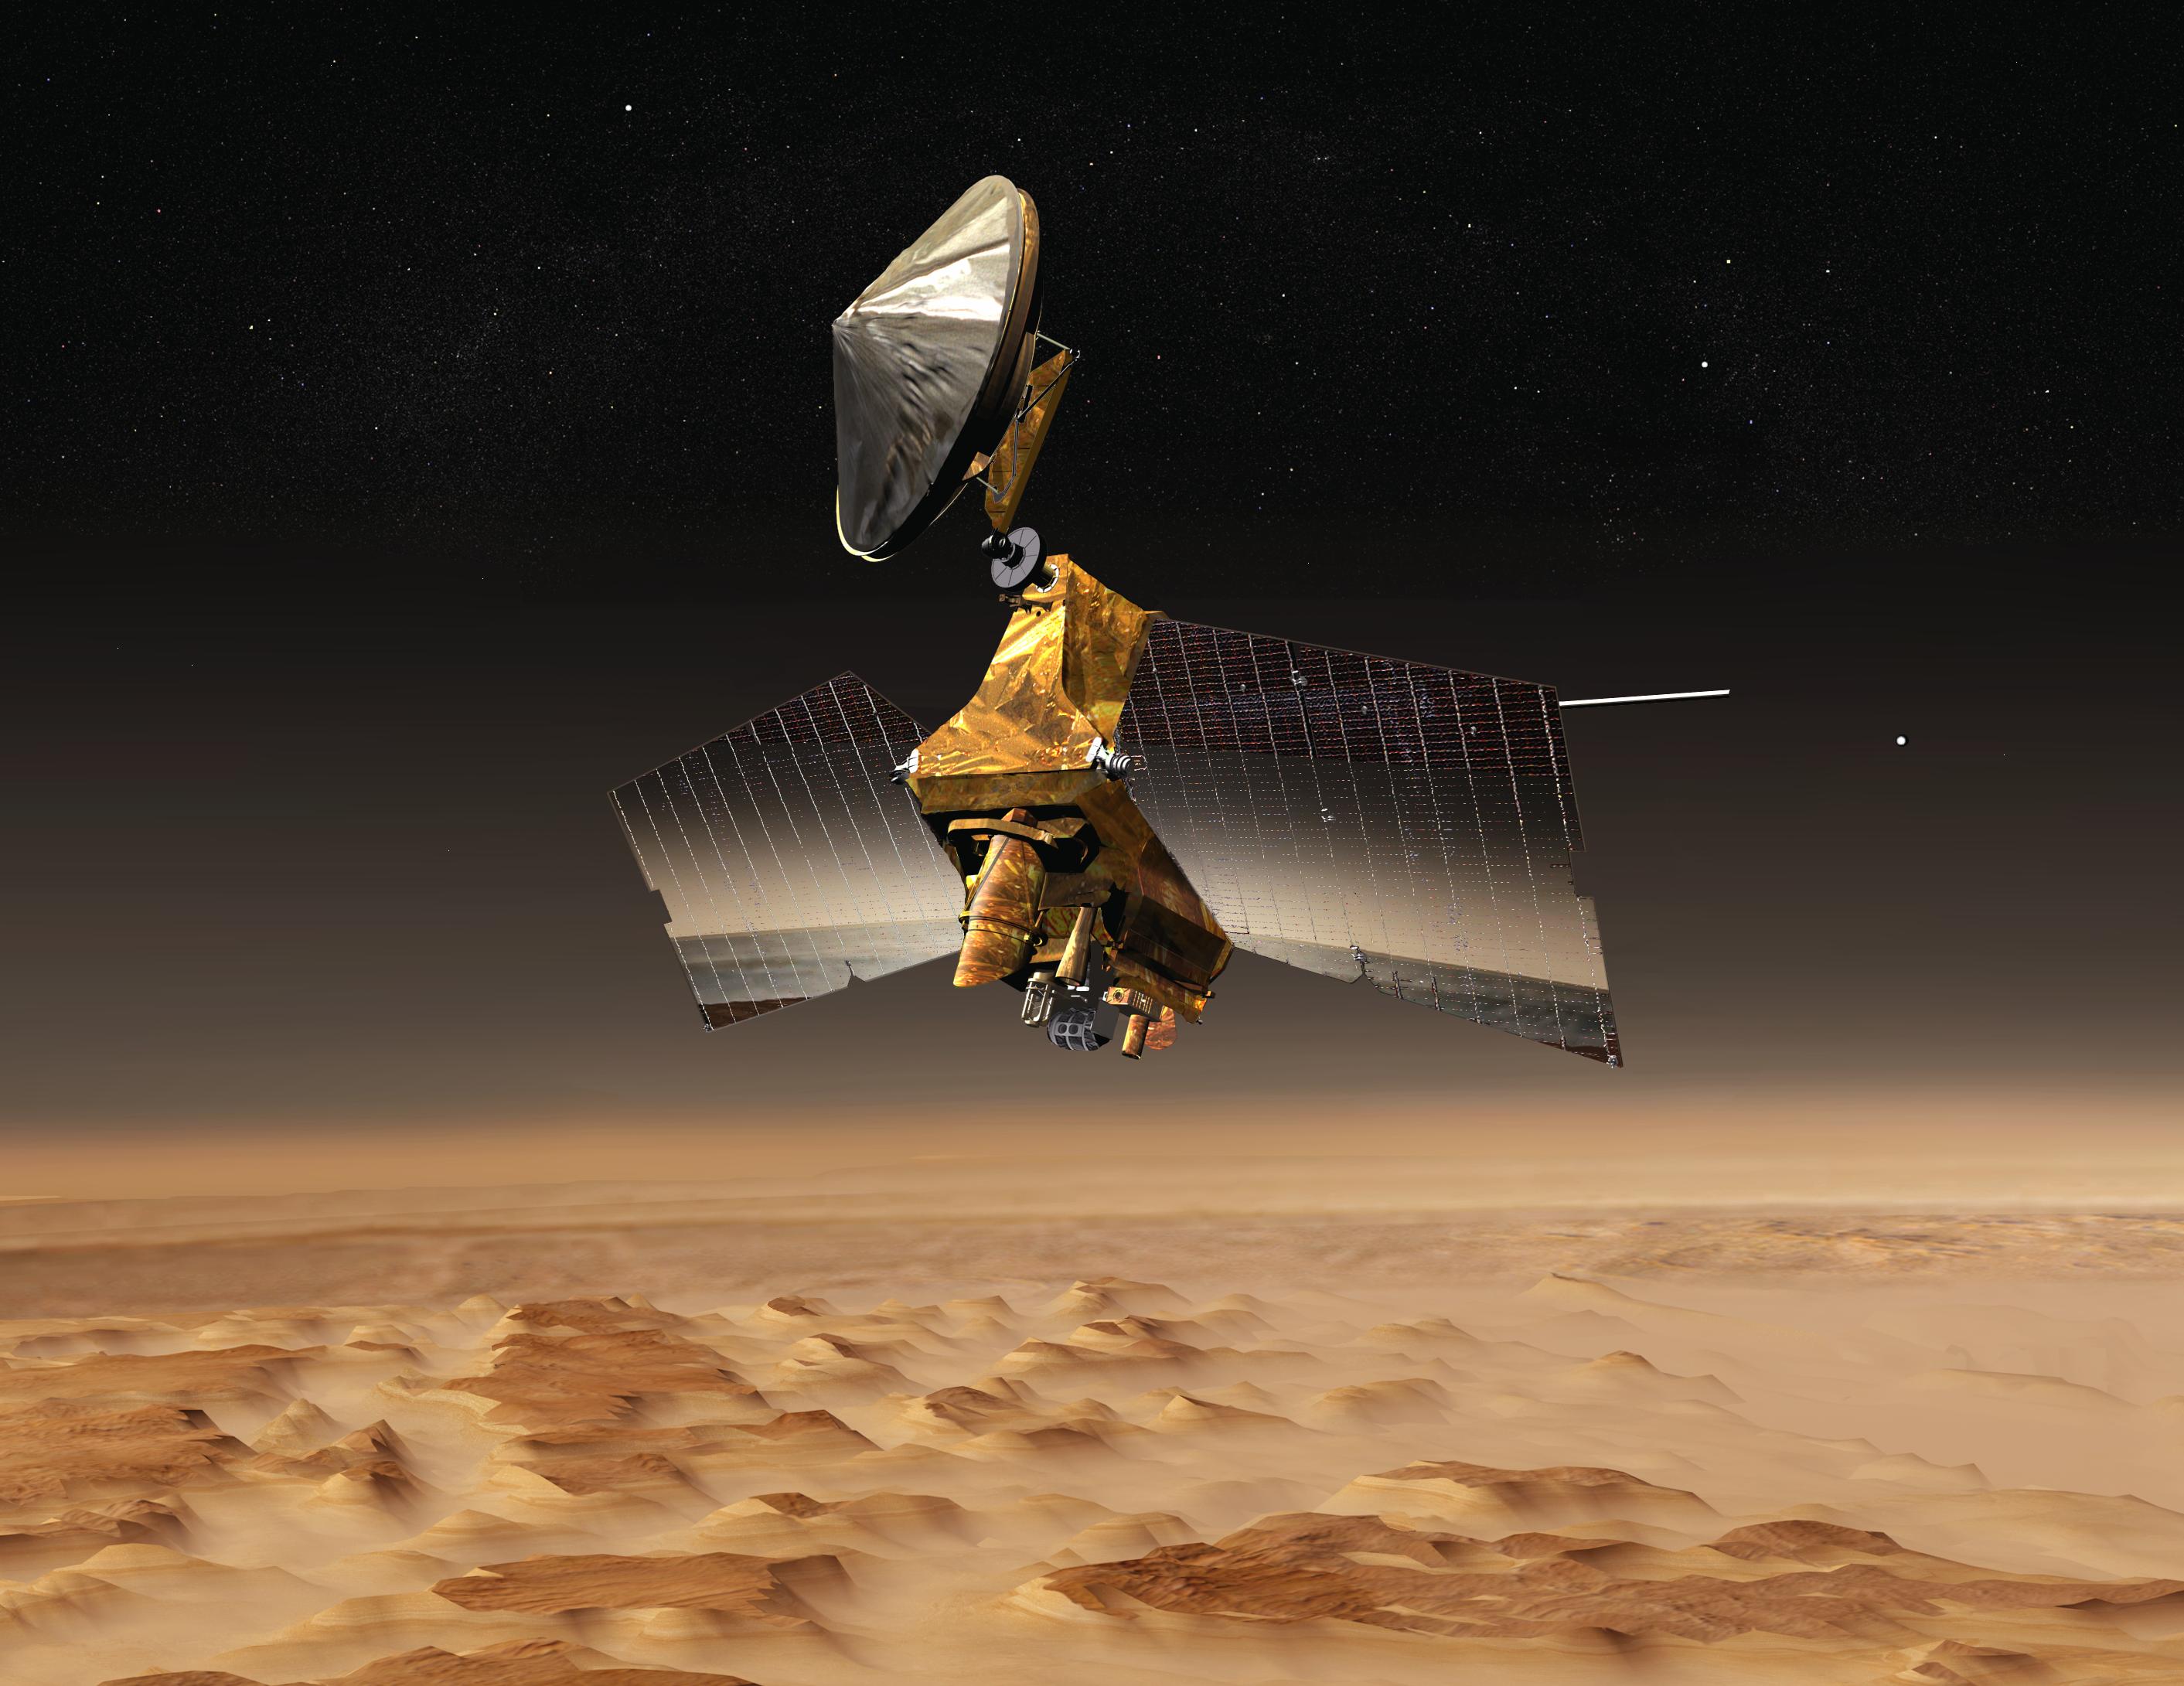 An illustration of a spacecraft over Mars